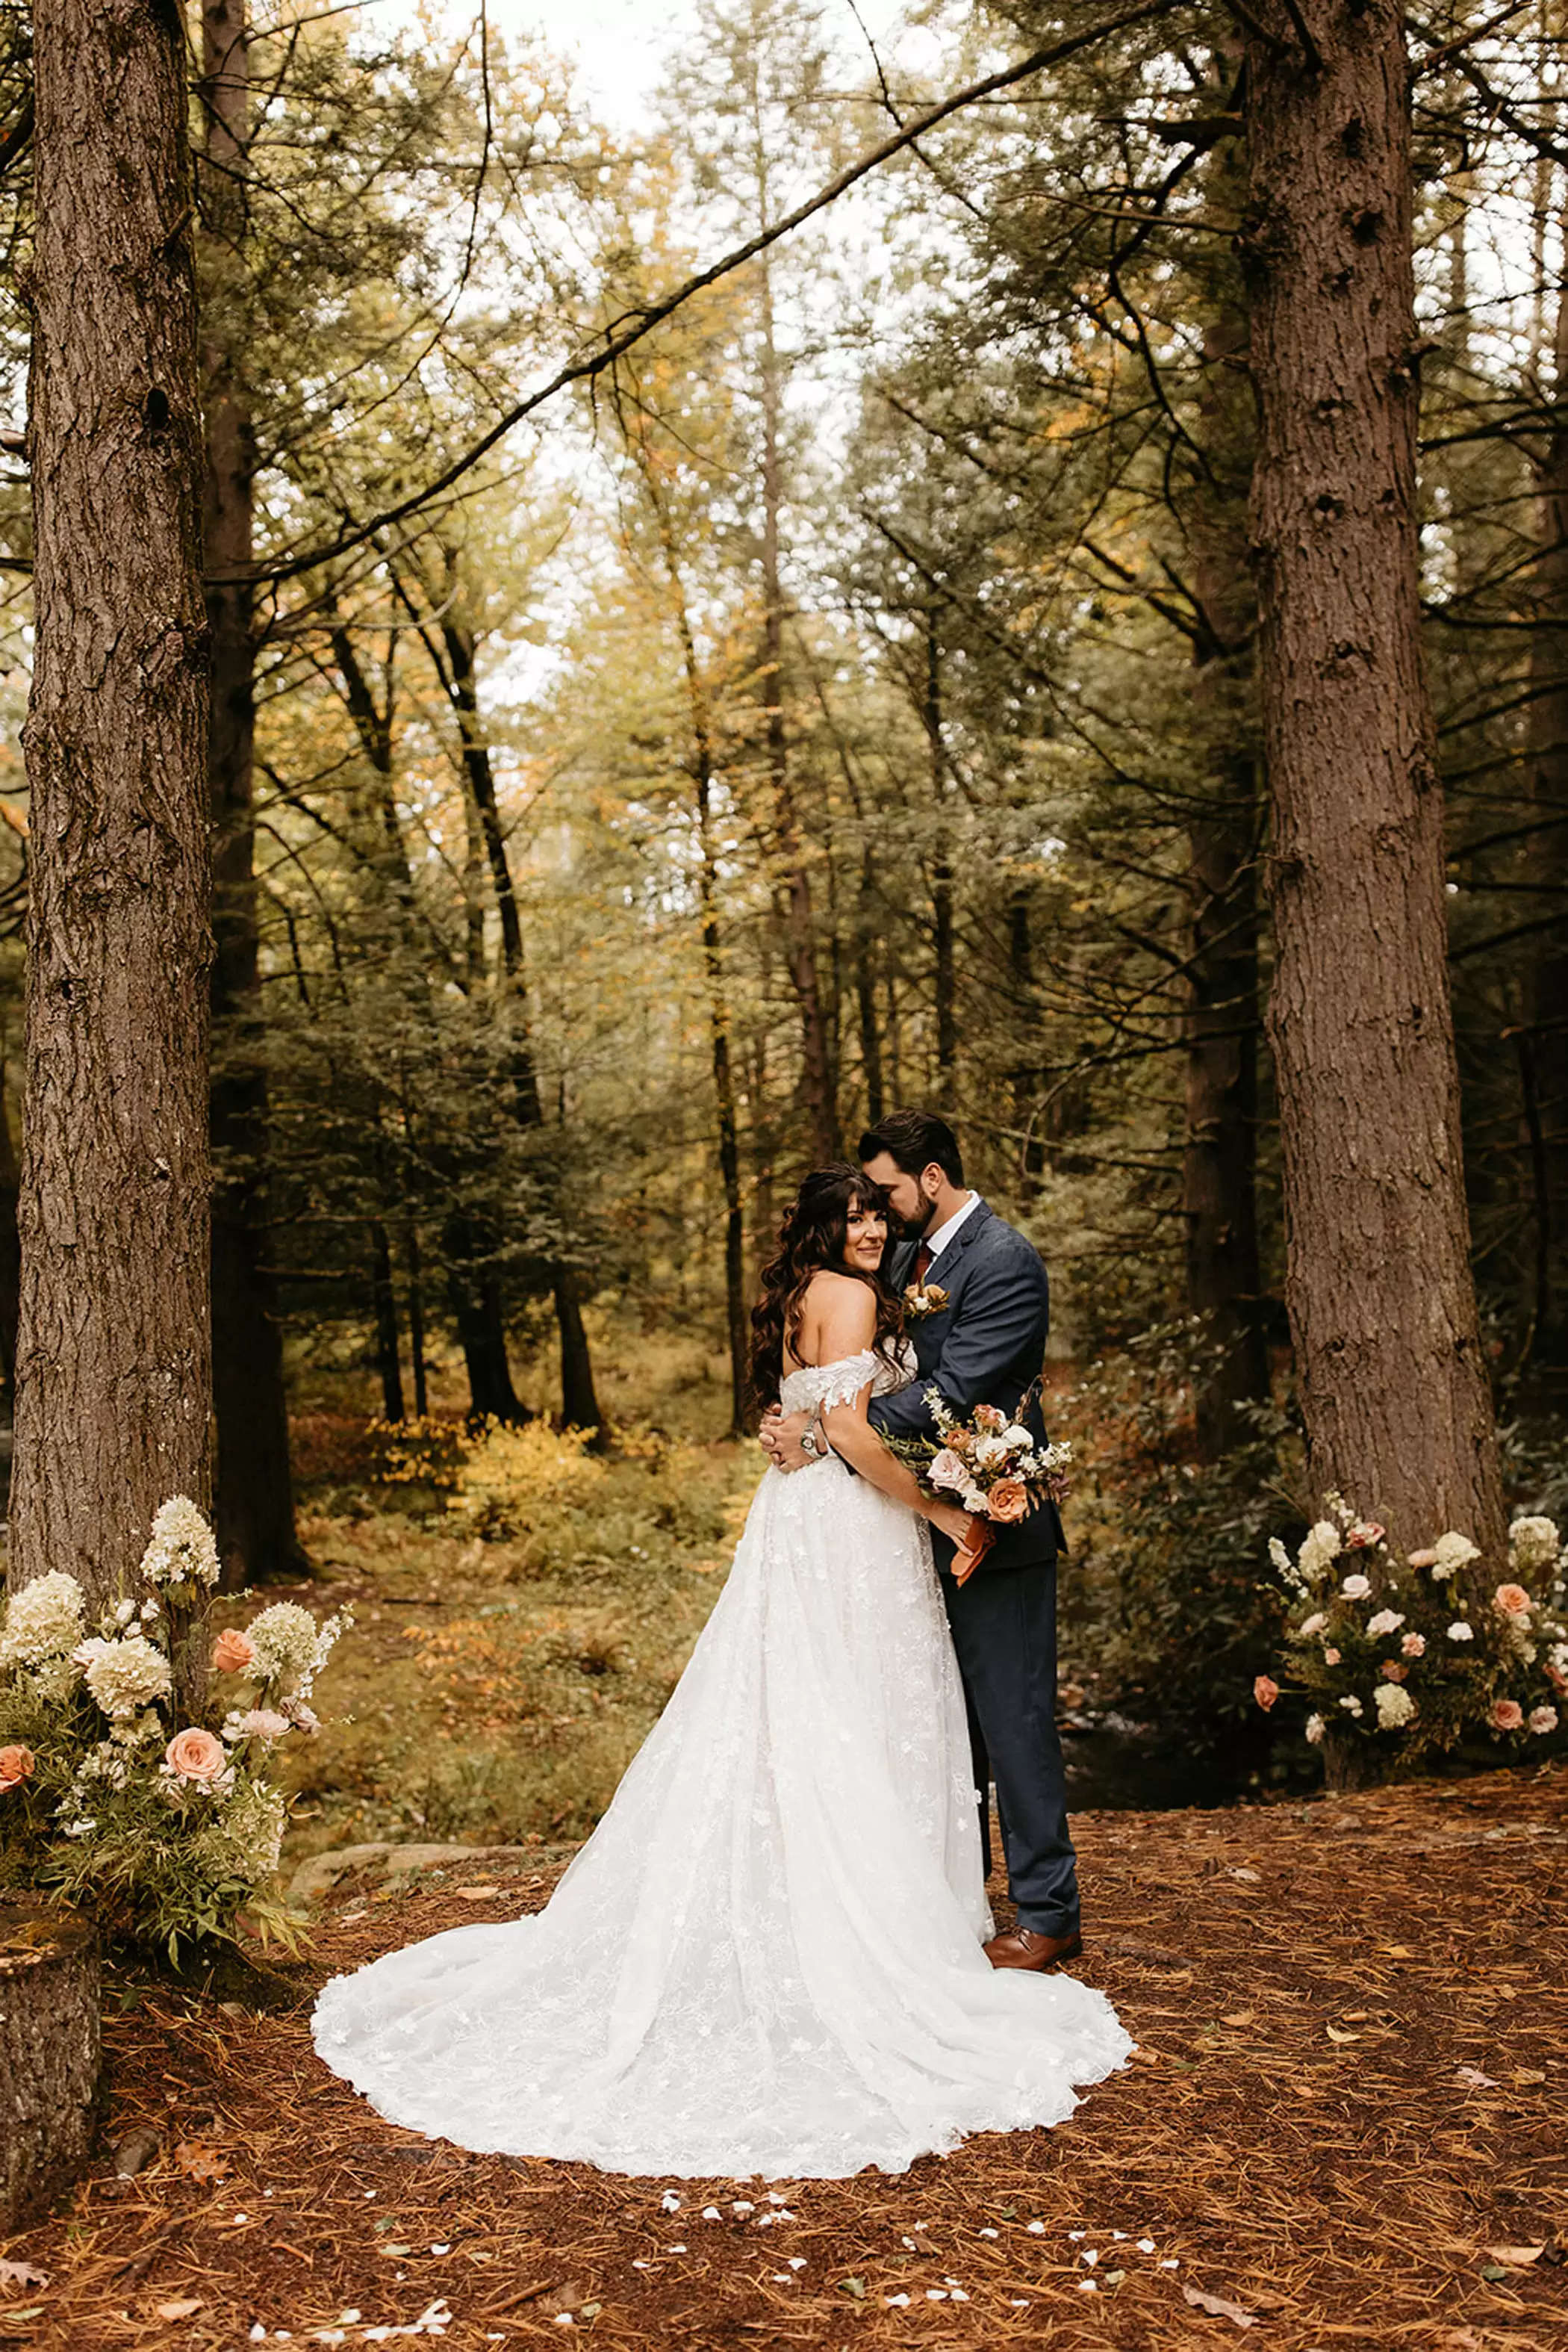 This Woodsy Fall Wedding ceremony within the Poconos Was Filled with Ethereal, Earthy Romance